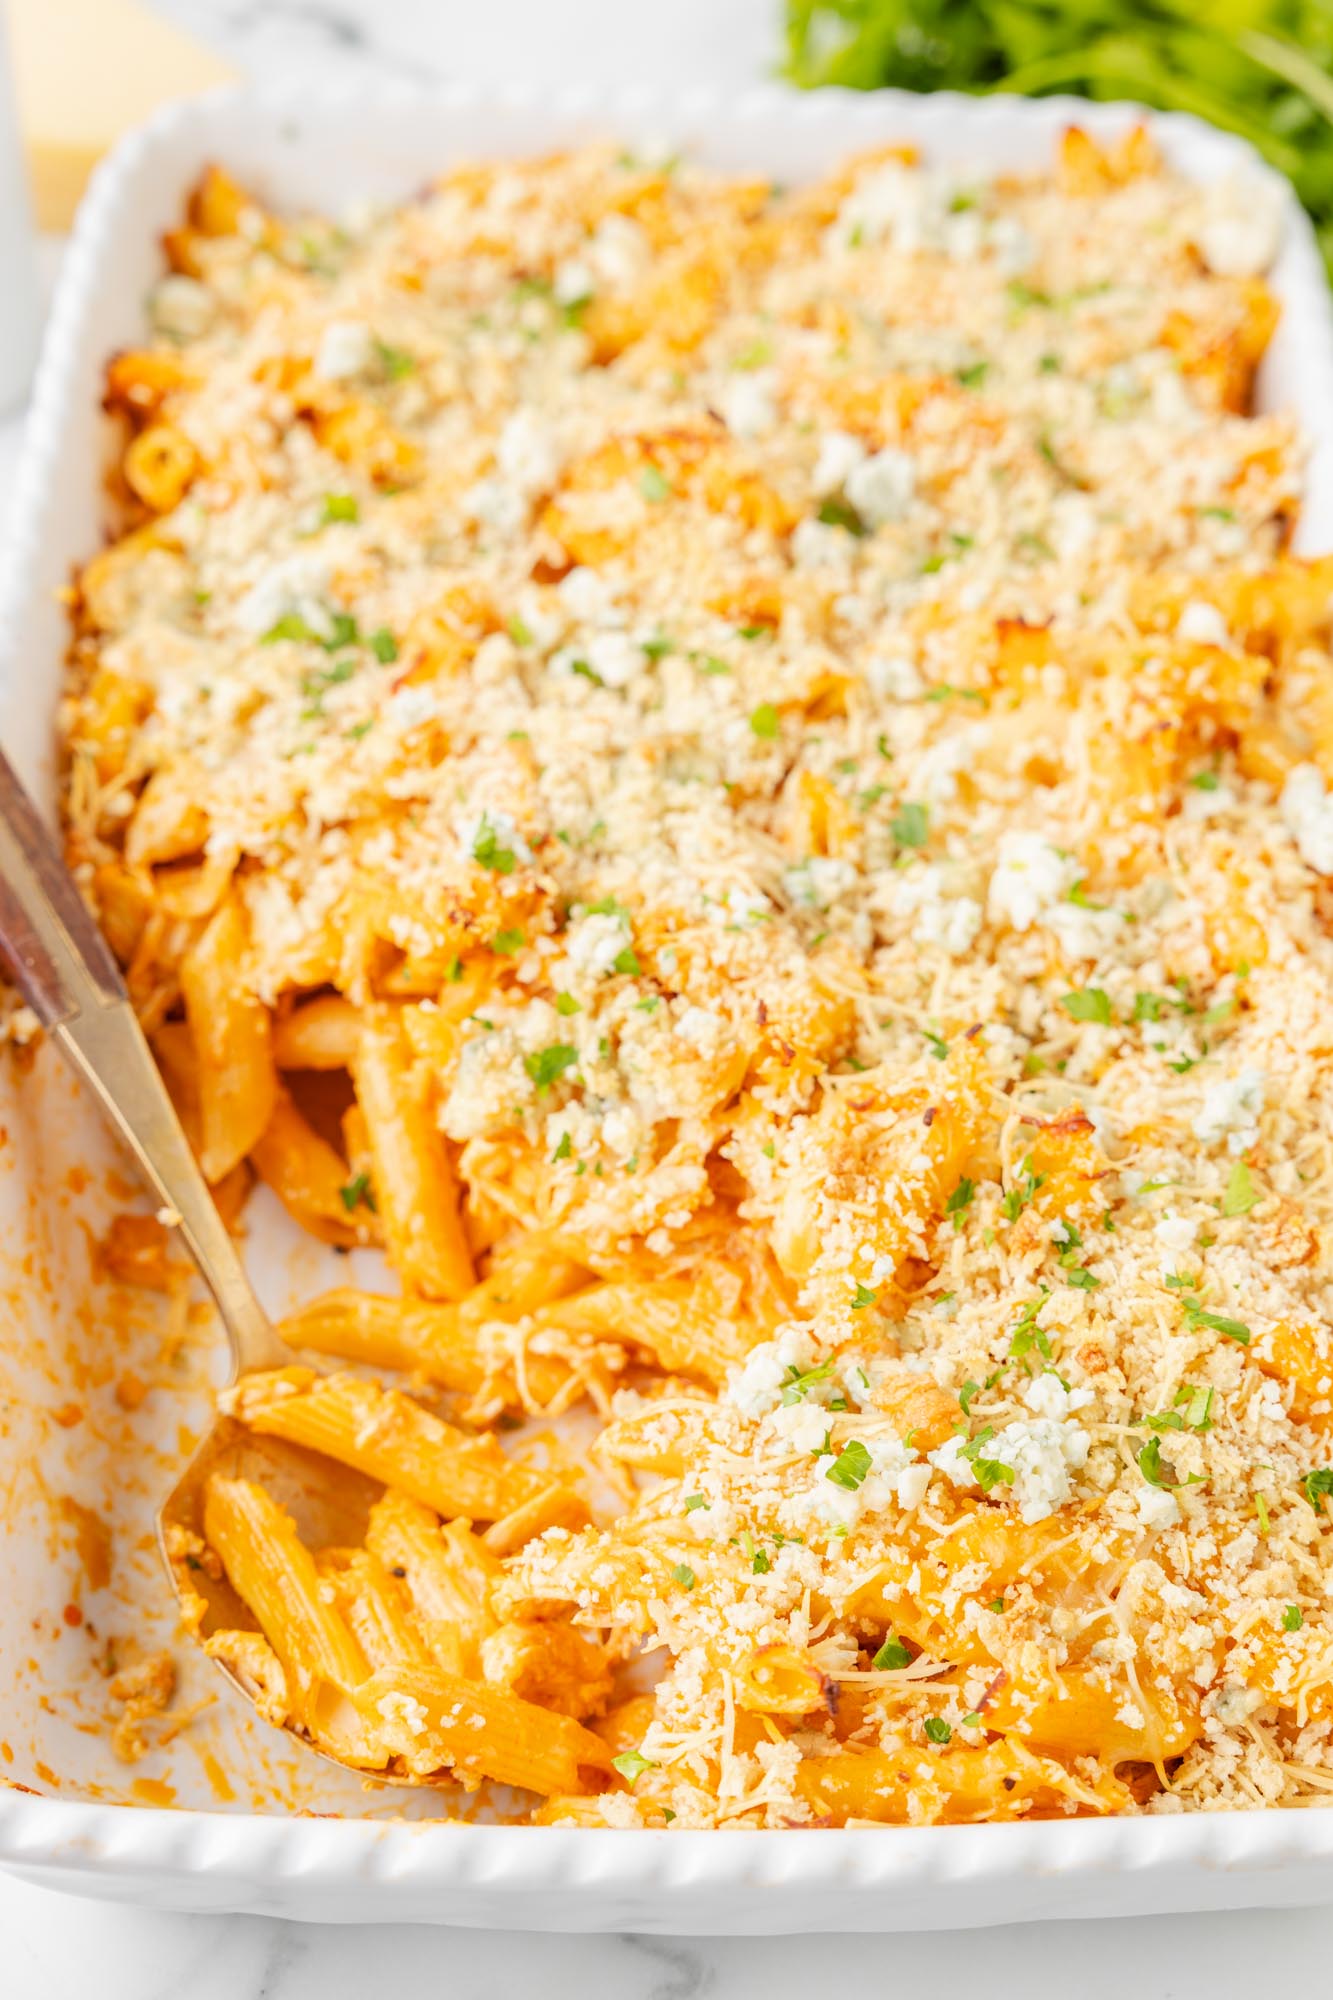 a white rectangular casserole dish holding baked buffalo chicken pasta topped with bread crumbs and cheese.